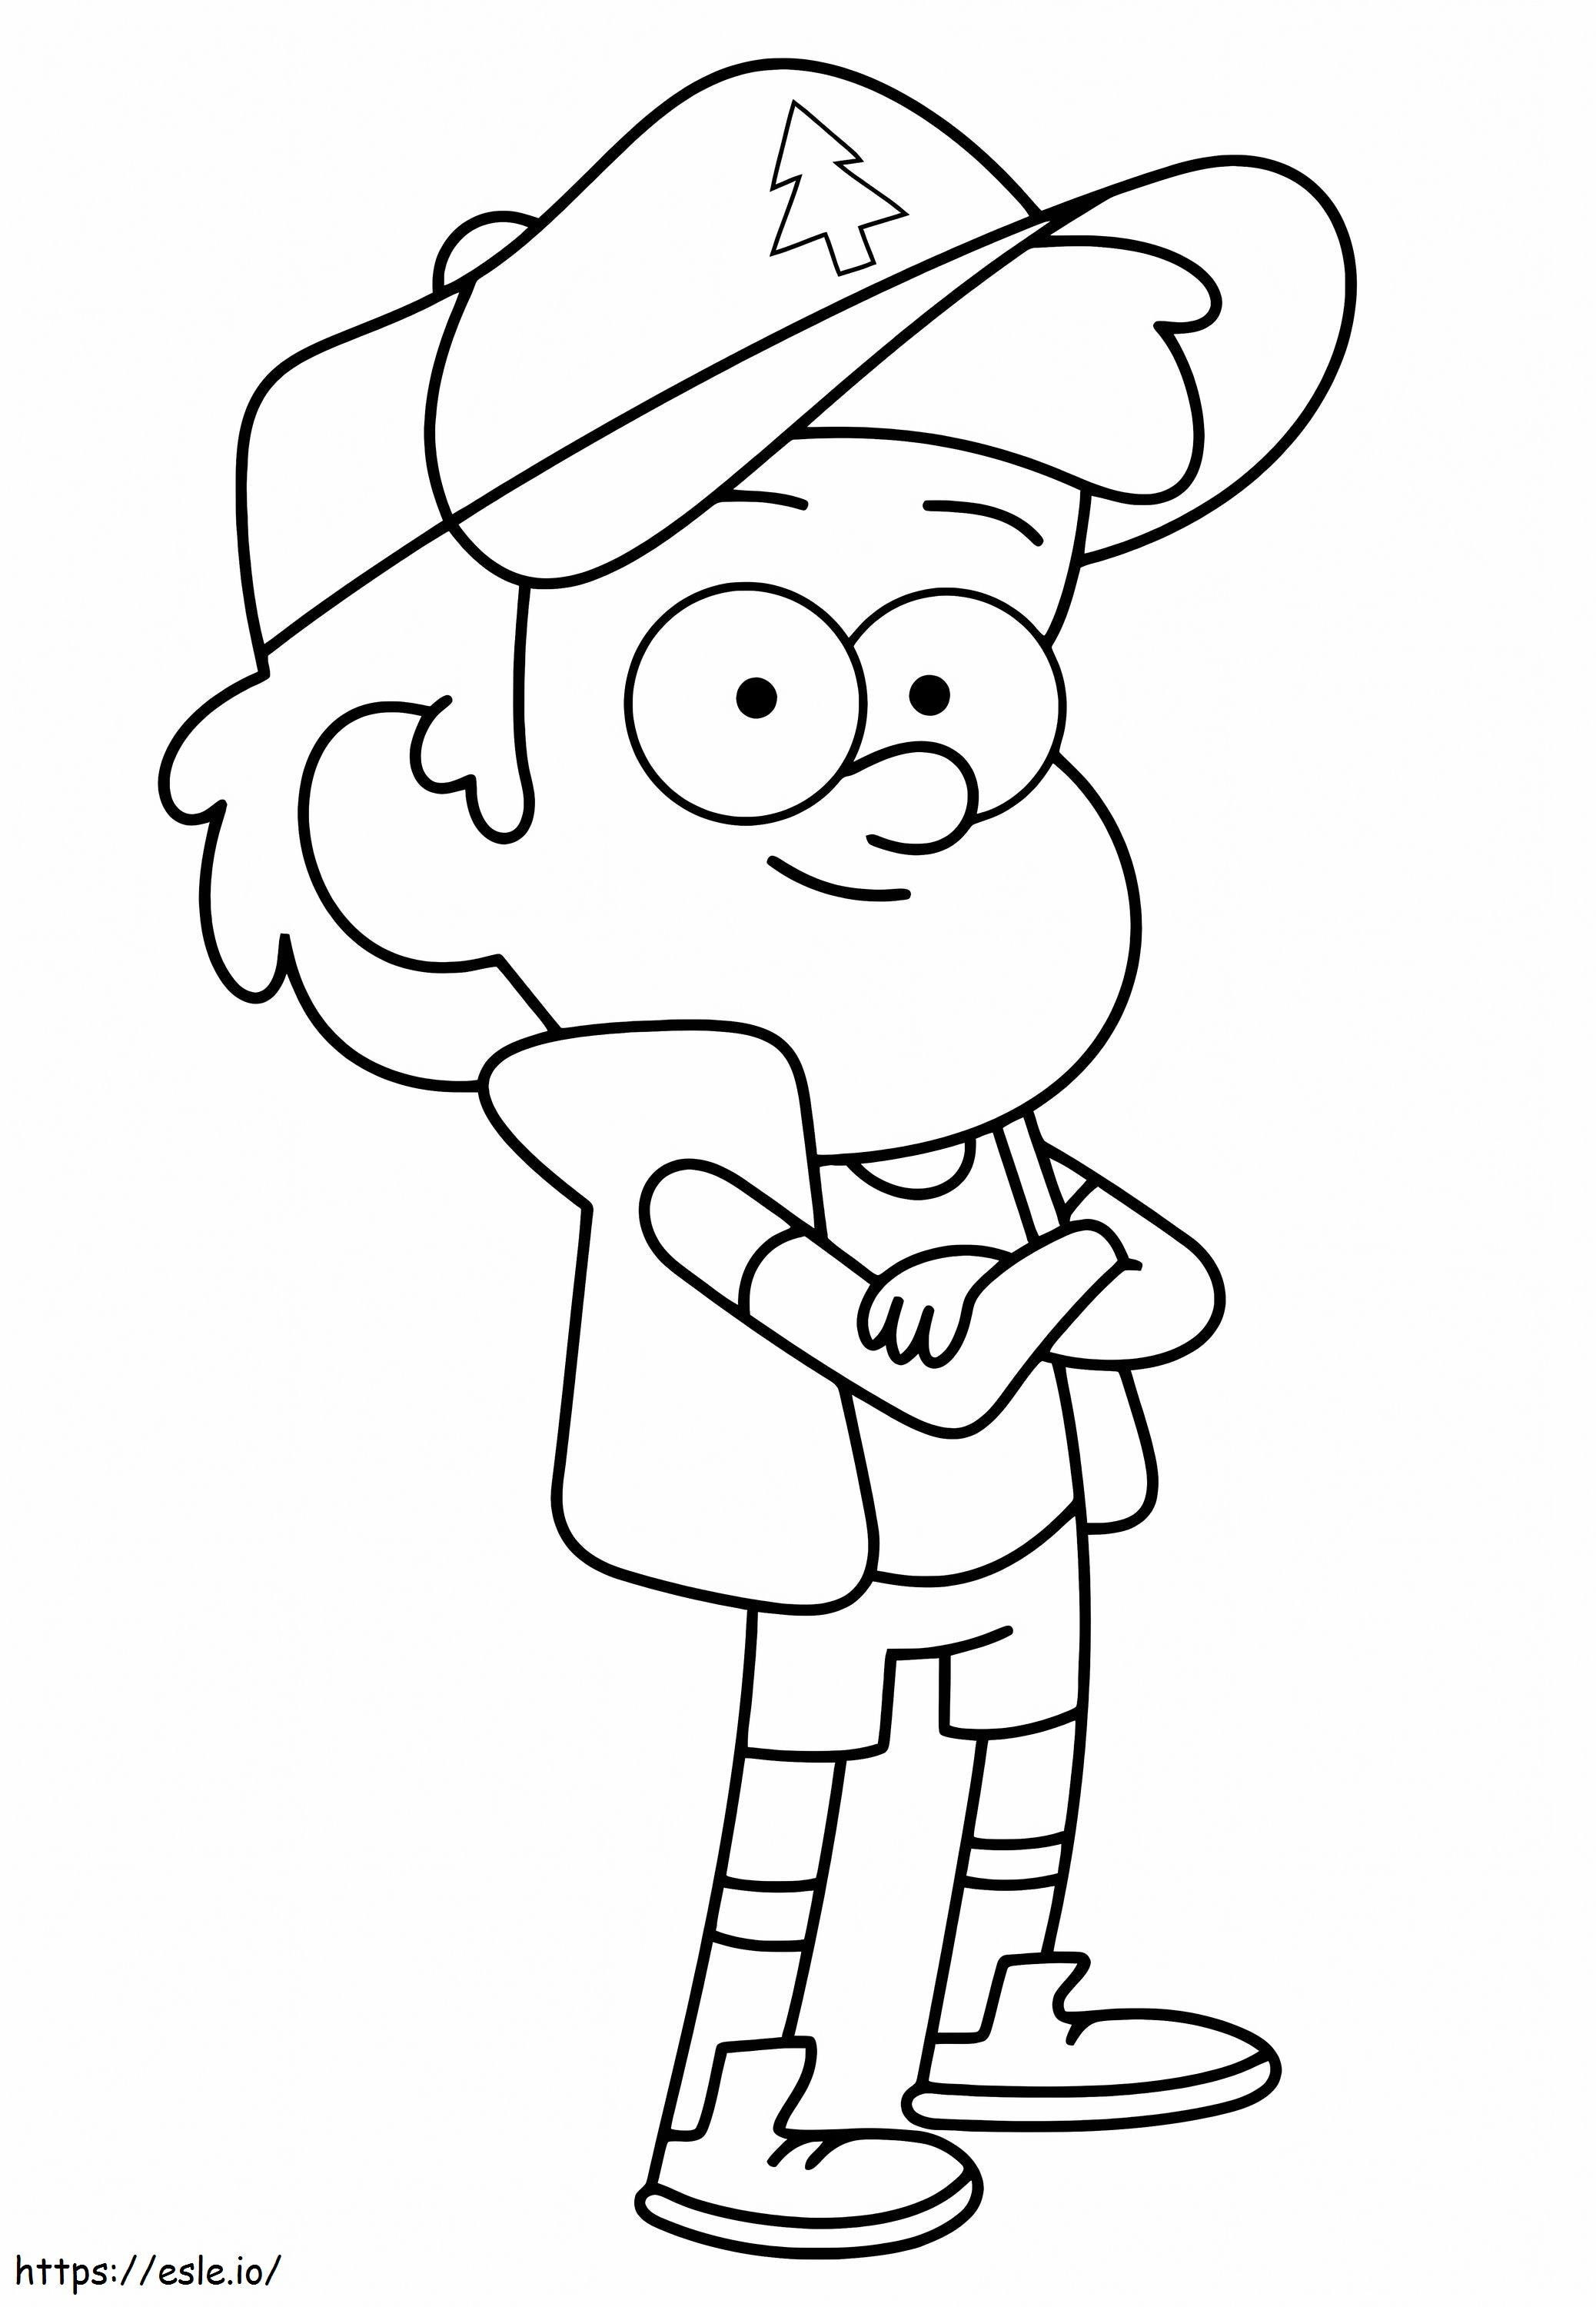 1529031380 G1Tb2Xr coloring page